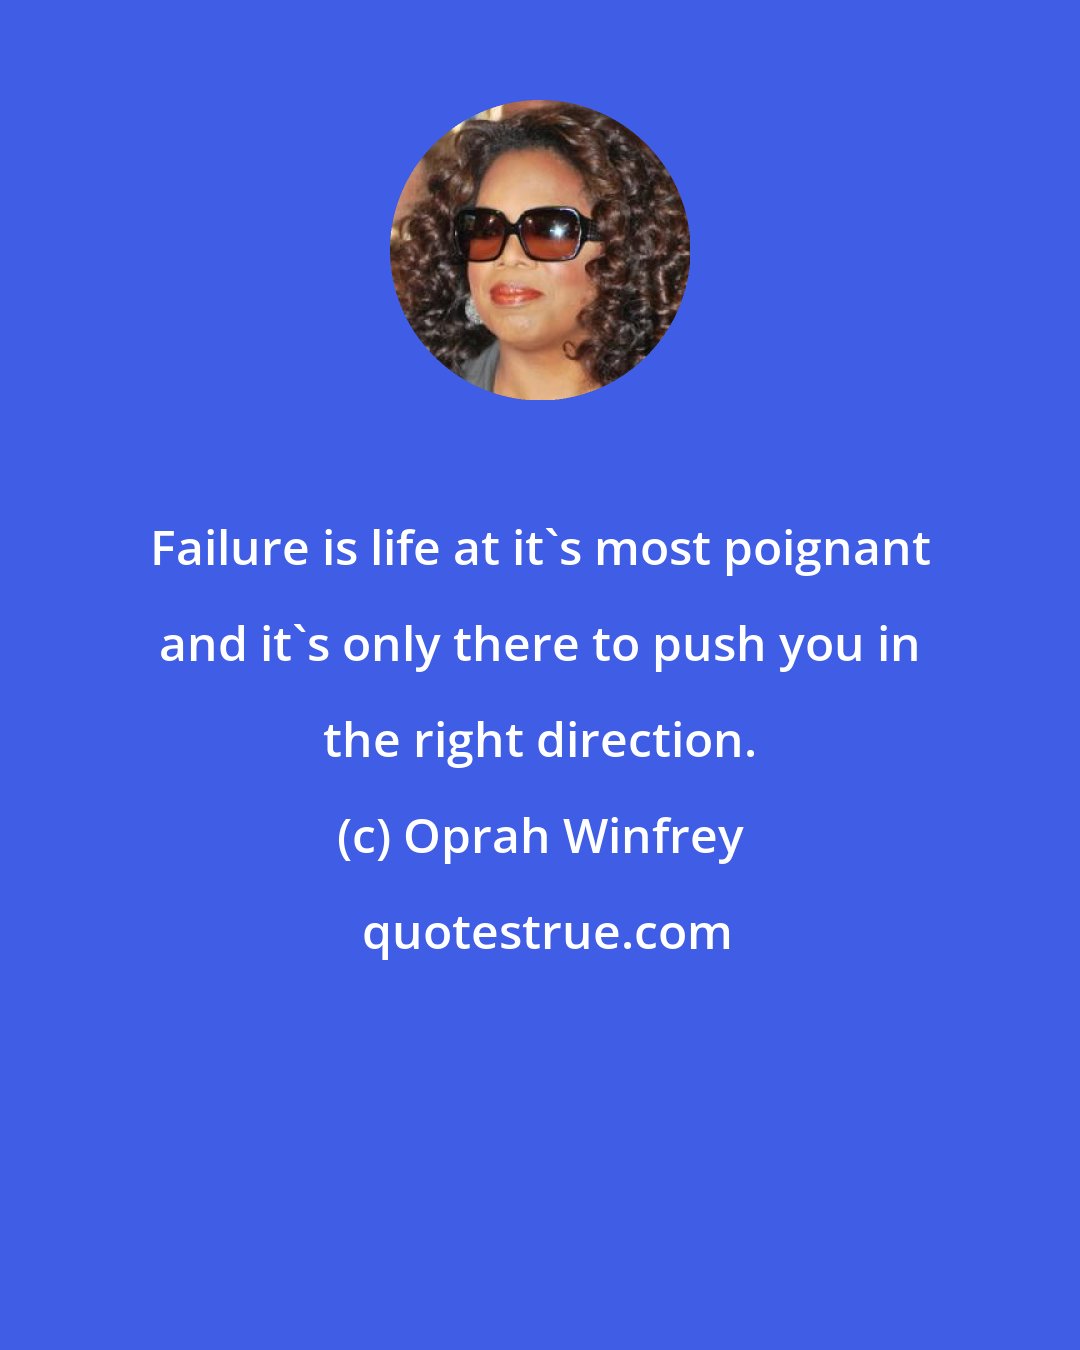 Oprah Winfrey: Failure is life at it's most poignant and it's only there to push you in the right direction.